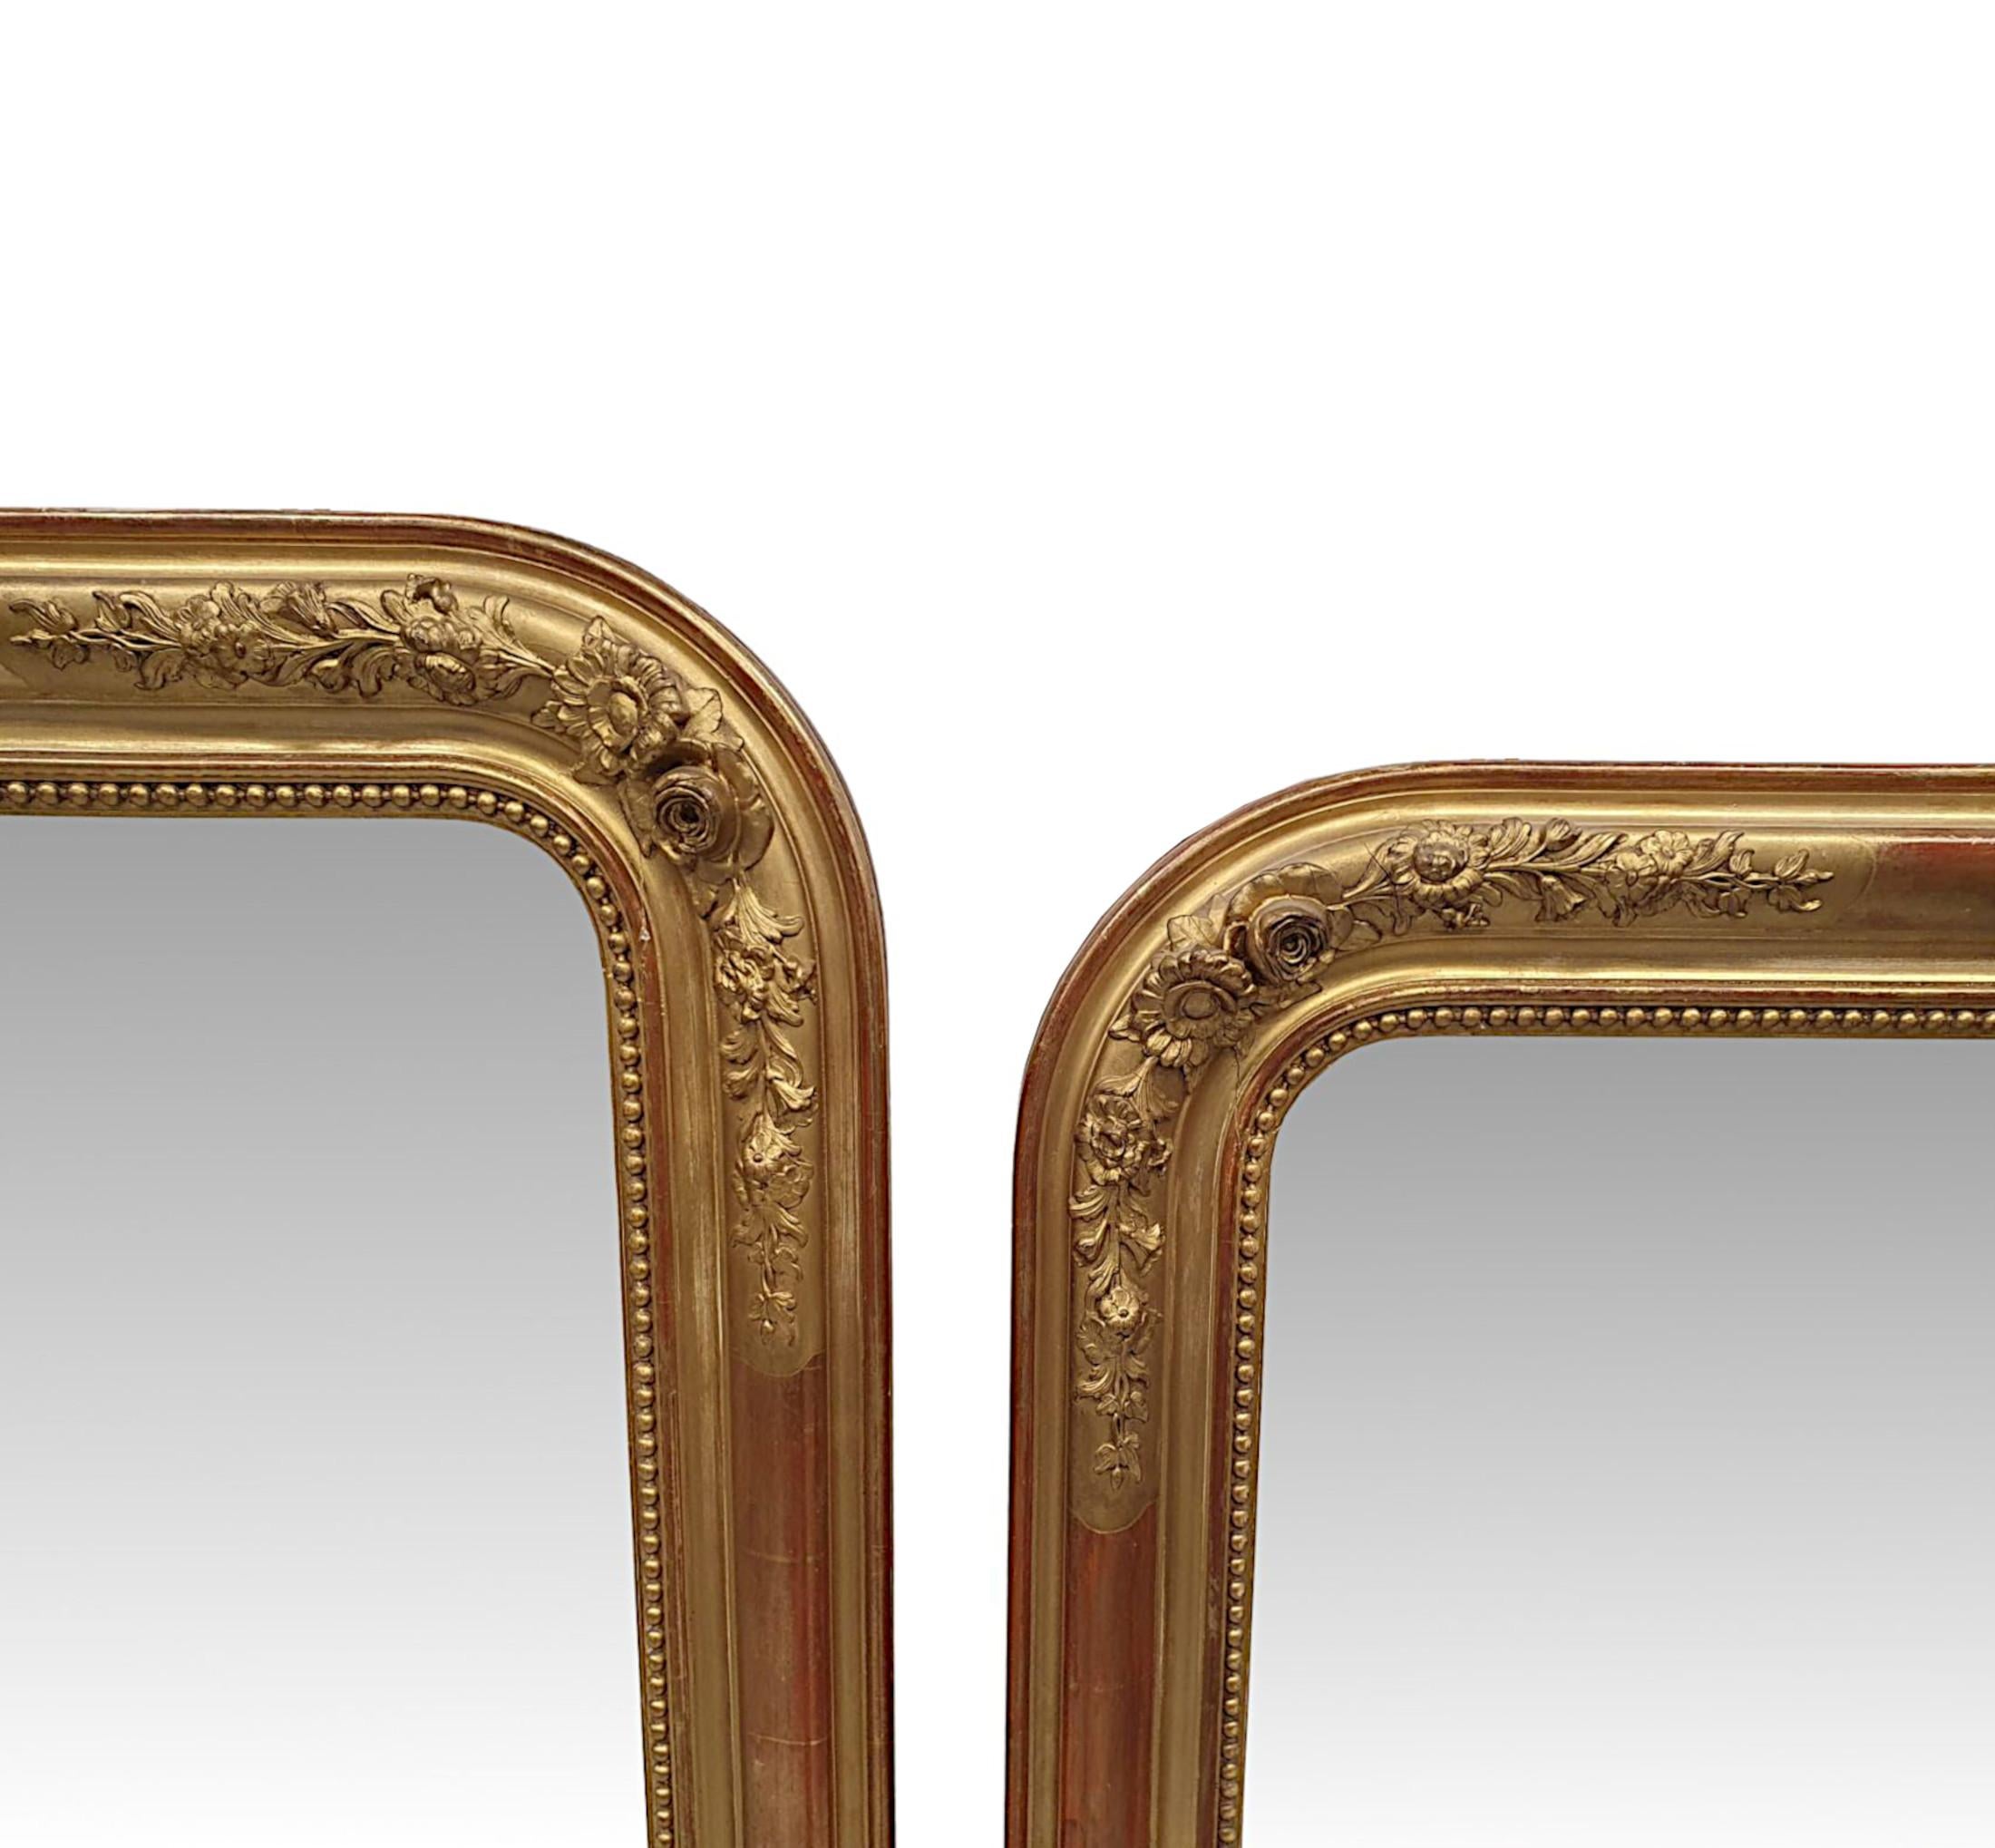 A fabulous near pair of 19th Century giltwood overmantle Mirrors with slight variation in size. The mirror glass plates of shaped rectangular form is set within a finely hand carved, moulded and fluted giltwood frames with an elegant beaded border